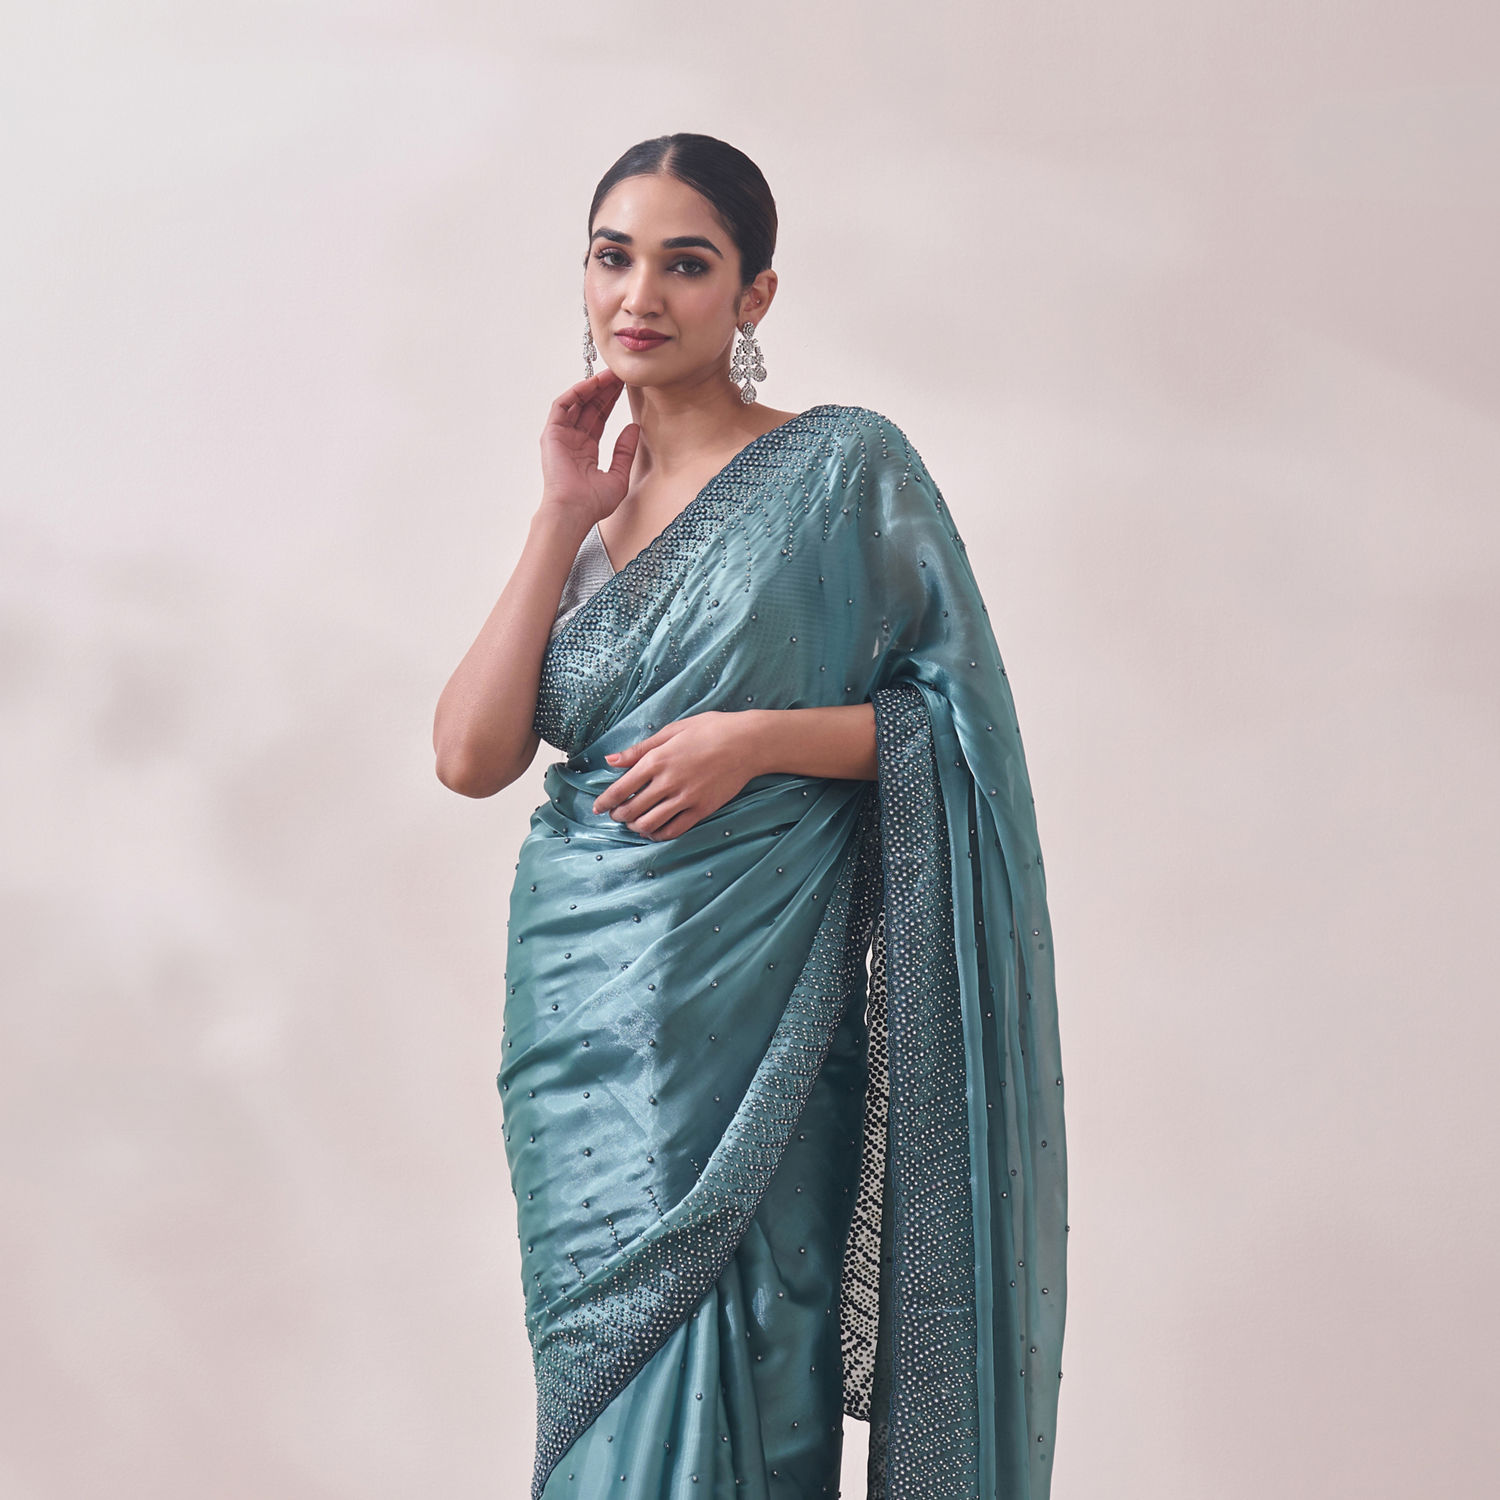 Saree for Women - Buy Teal Blue Stone Embellished Saree Online @Mohey